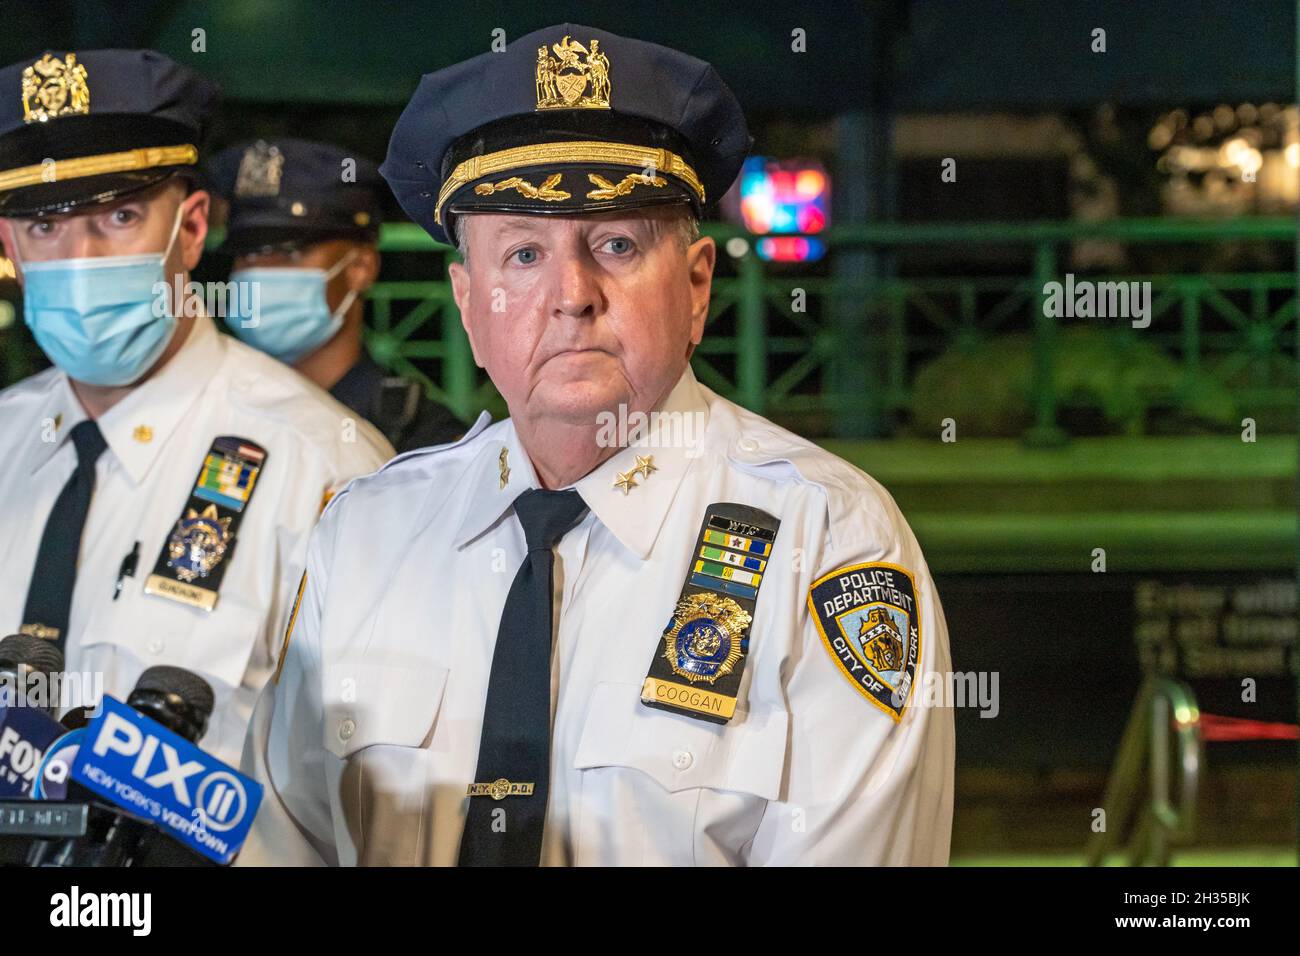 NEW YORK, NY – OCTOBER 25: New York Police Transit Bureau Assistant Chief  Coogan speaks during a press conference outside the Union Square subway  station on October 25, 2021 in New York